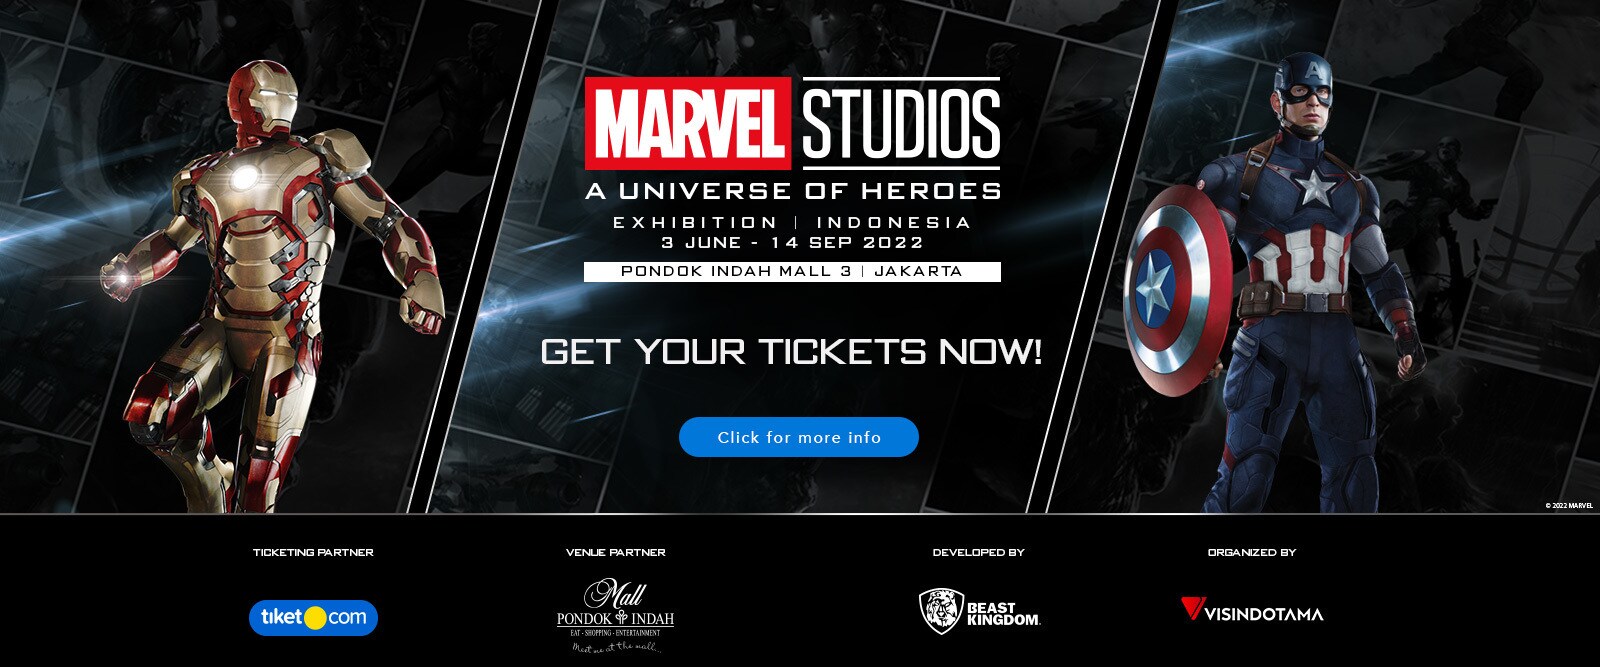 Marvel Exhibition - Featured Content Banner